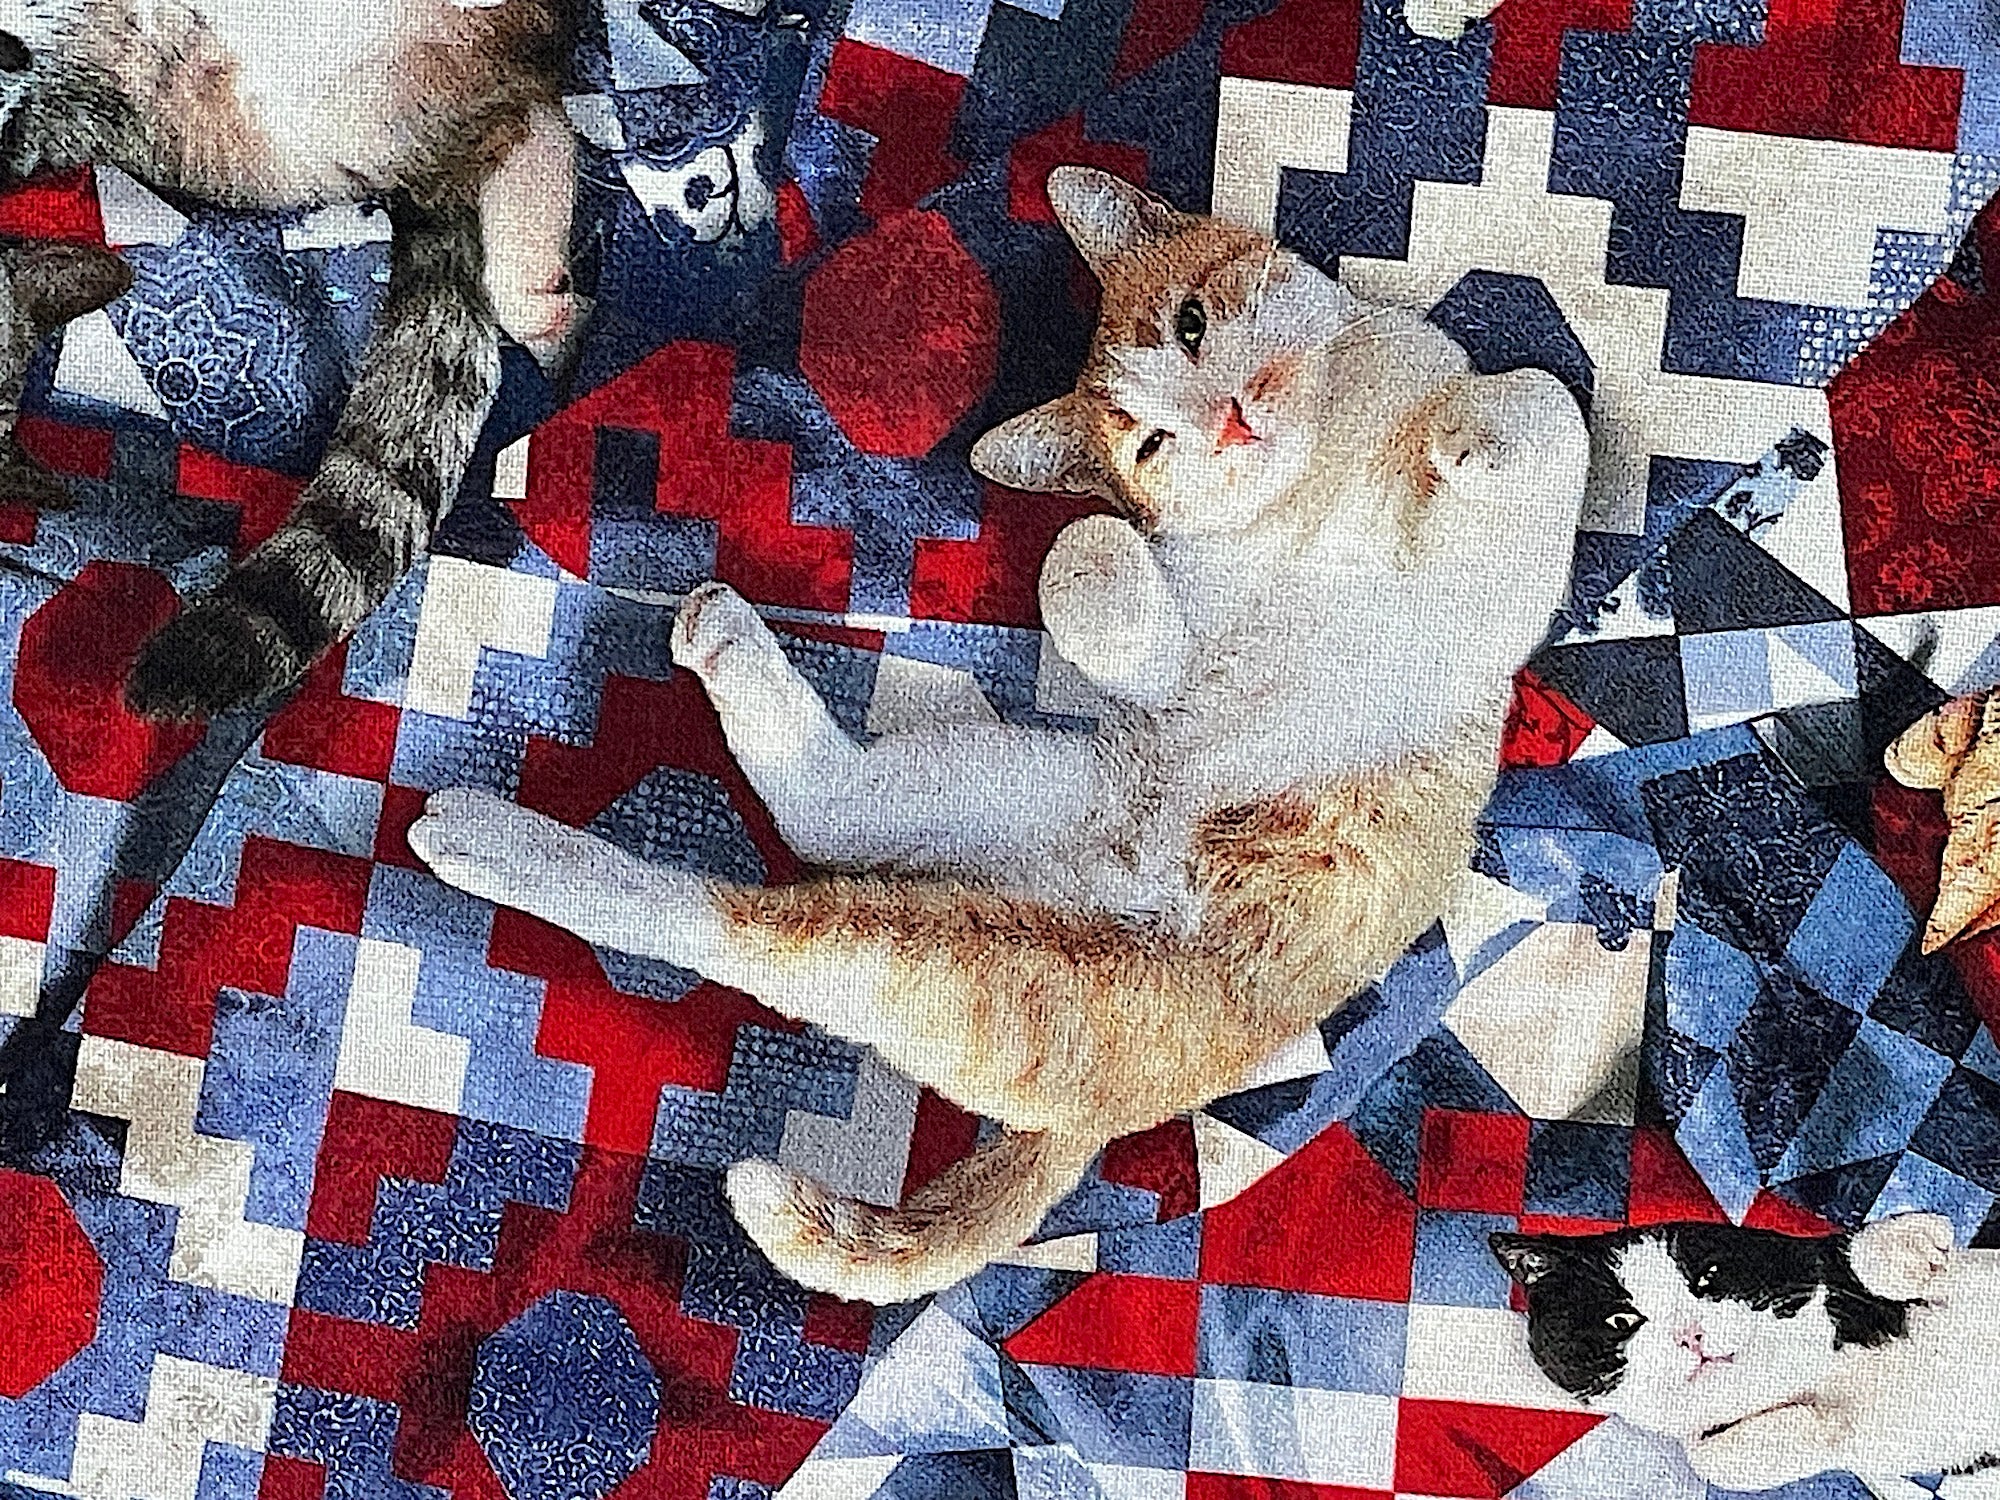 Close up of a cat sprawled out on a quilt.